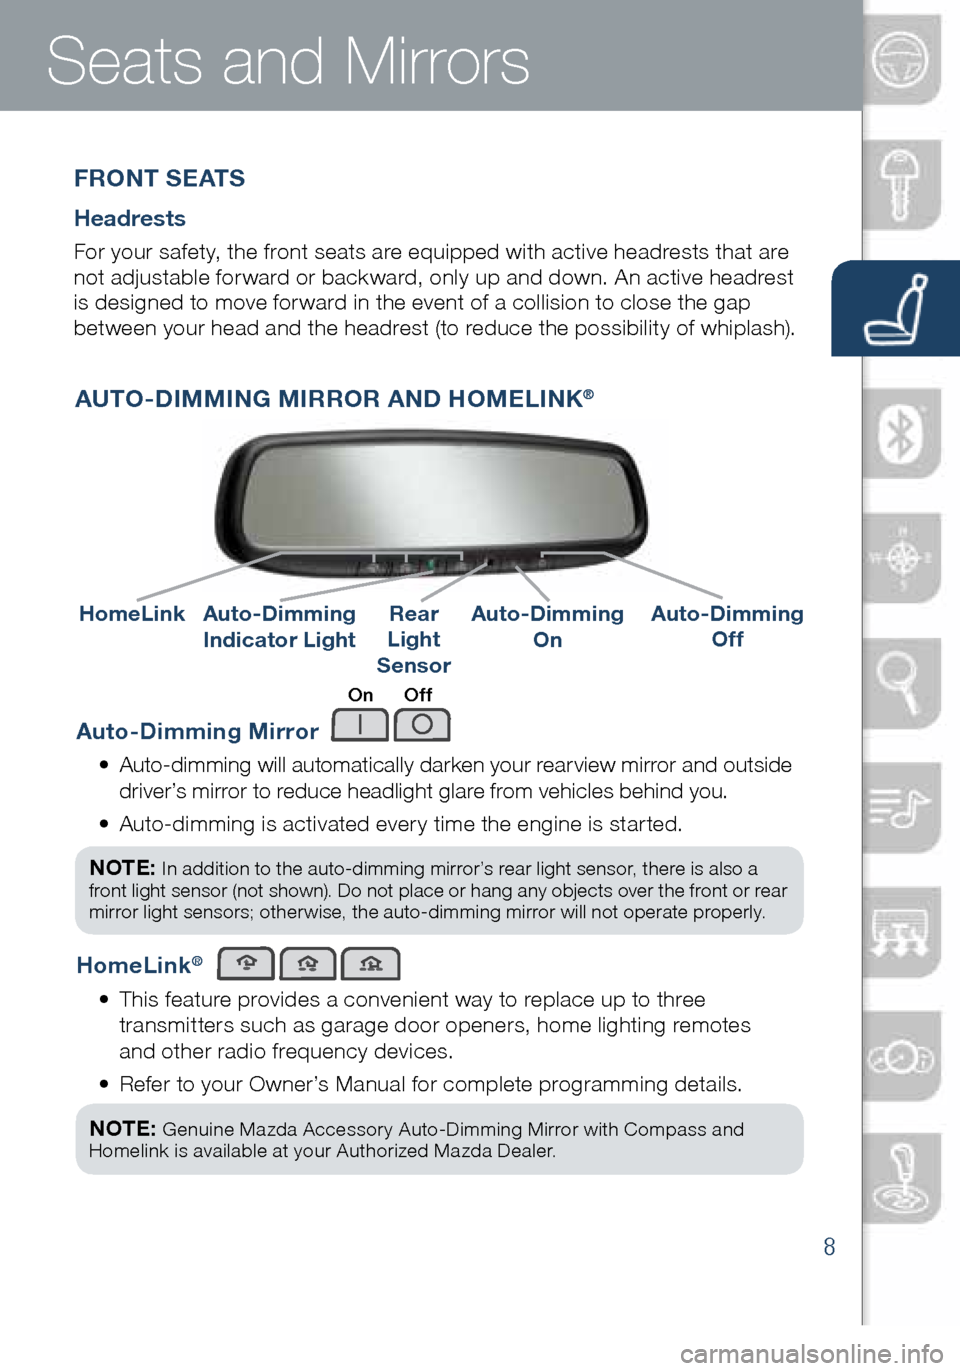 MAZDA MODEL 6 2016  Smart Start Guide (in English) 8
Auto-Dimming Mirror
•   Auto-dimming will automatically darken your rearview mirror and outside 
driver’s mirror to reduce headlight glare from vehicles behind you. 
•    Auto-dimming is activ